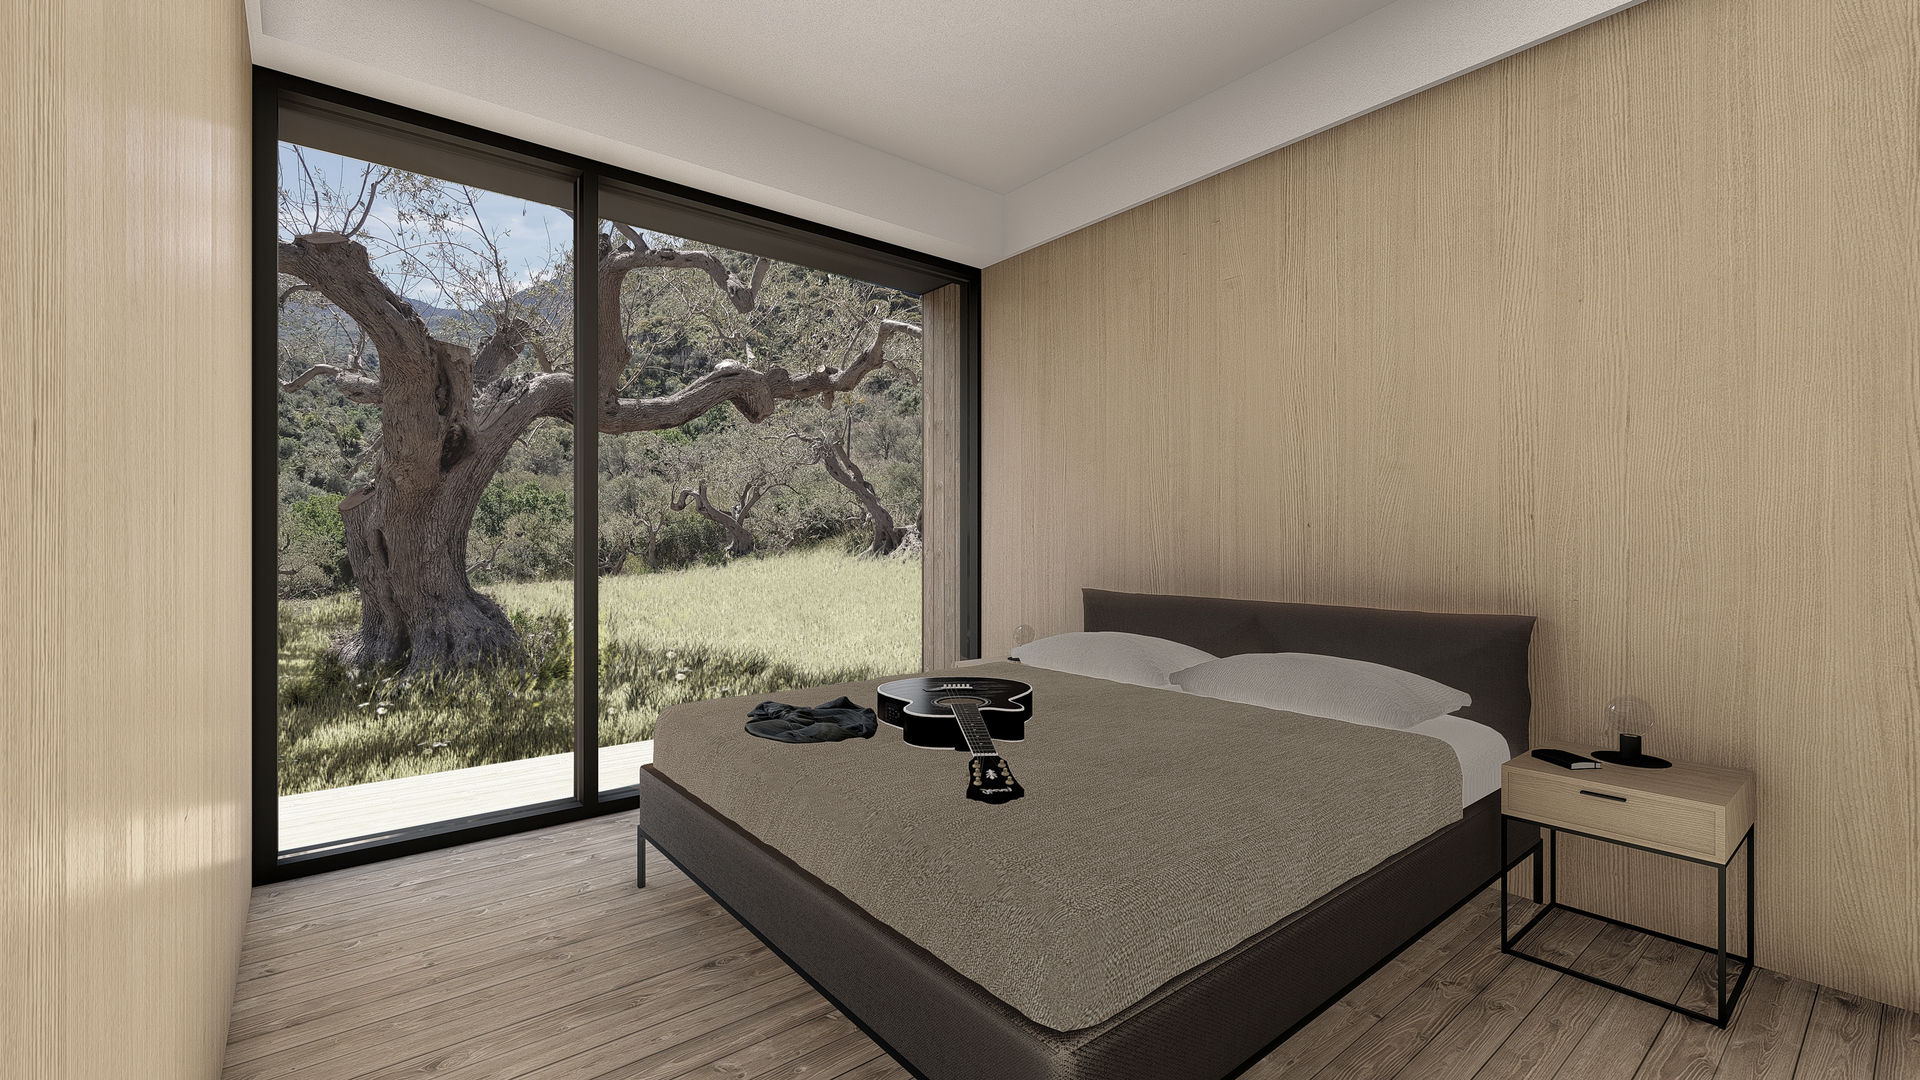 WOODEN HOUSE G|C – SICILY, ALESSIO LO BELLO ARCHITETTO a Palermo ALESSIO LO BELLO ARCHITETTO a Palermo Modern style bedroom Wood Wood effect king-size bedroom, glass window, room with a view, queen-size bed, double room